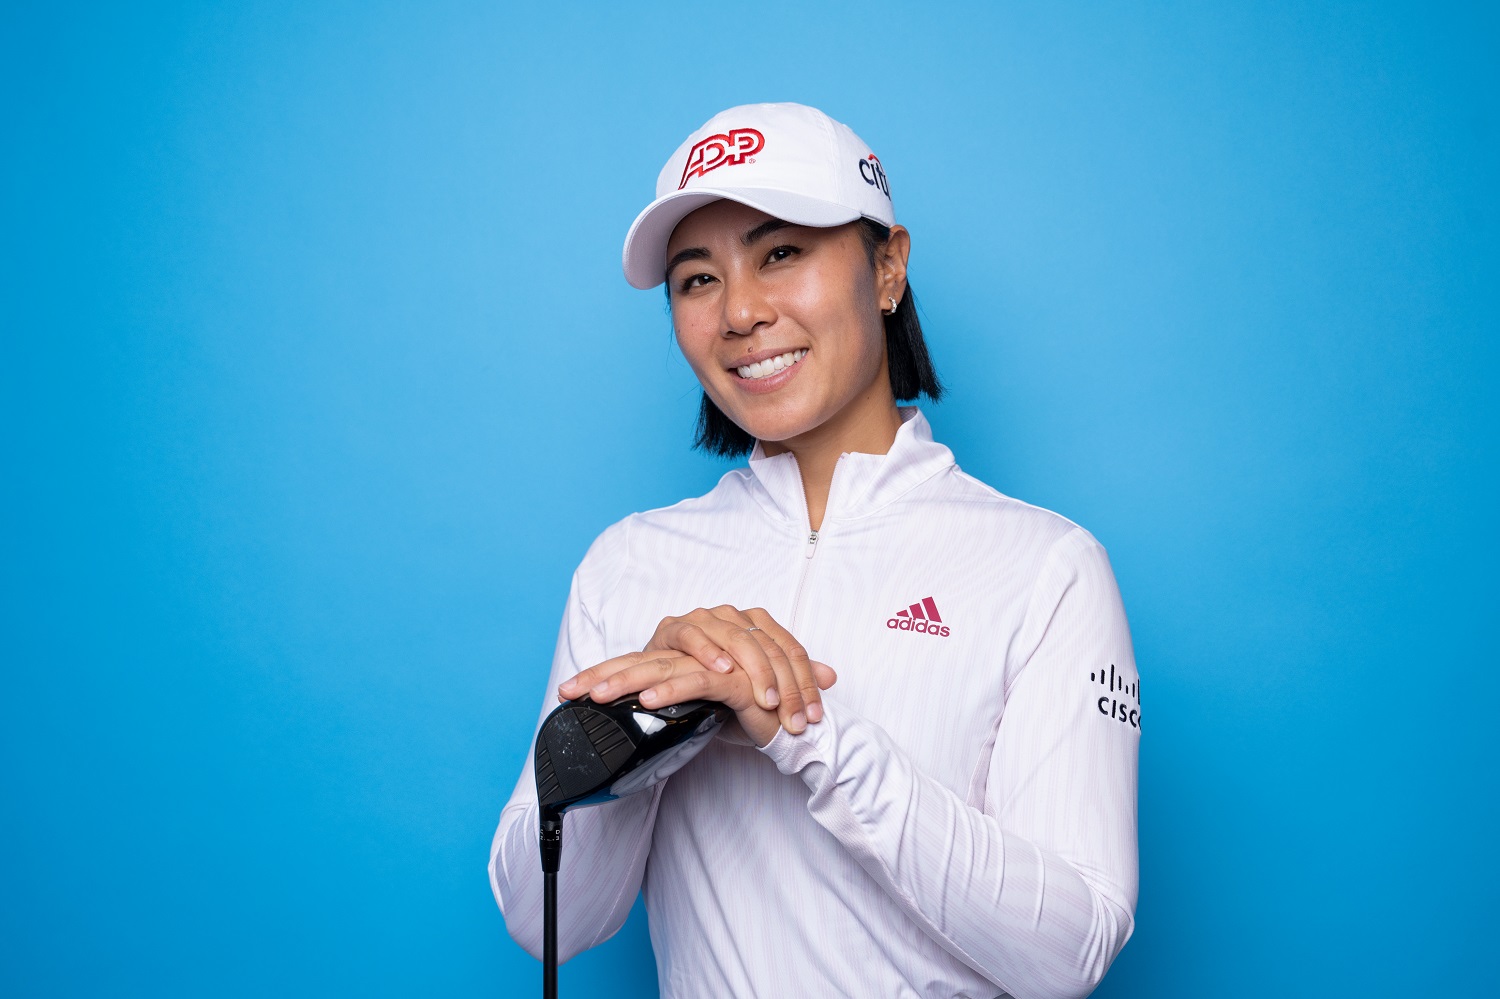 Danielle Kang poses for a portrait during the LPGA Photo Shoot leading up to the JTBC Classic at Aviara Golf Club on March 22, 2022, in Carlsbad, California.